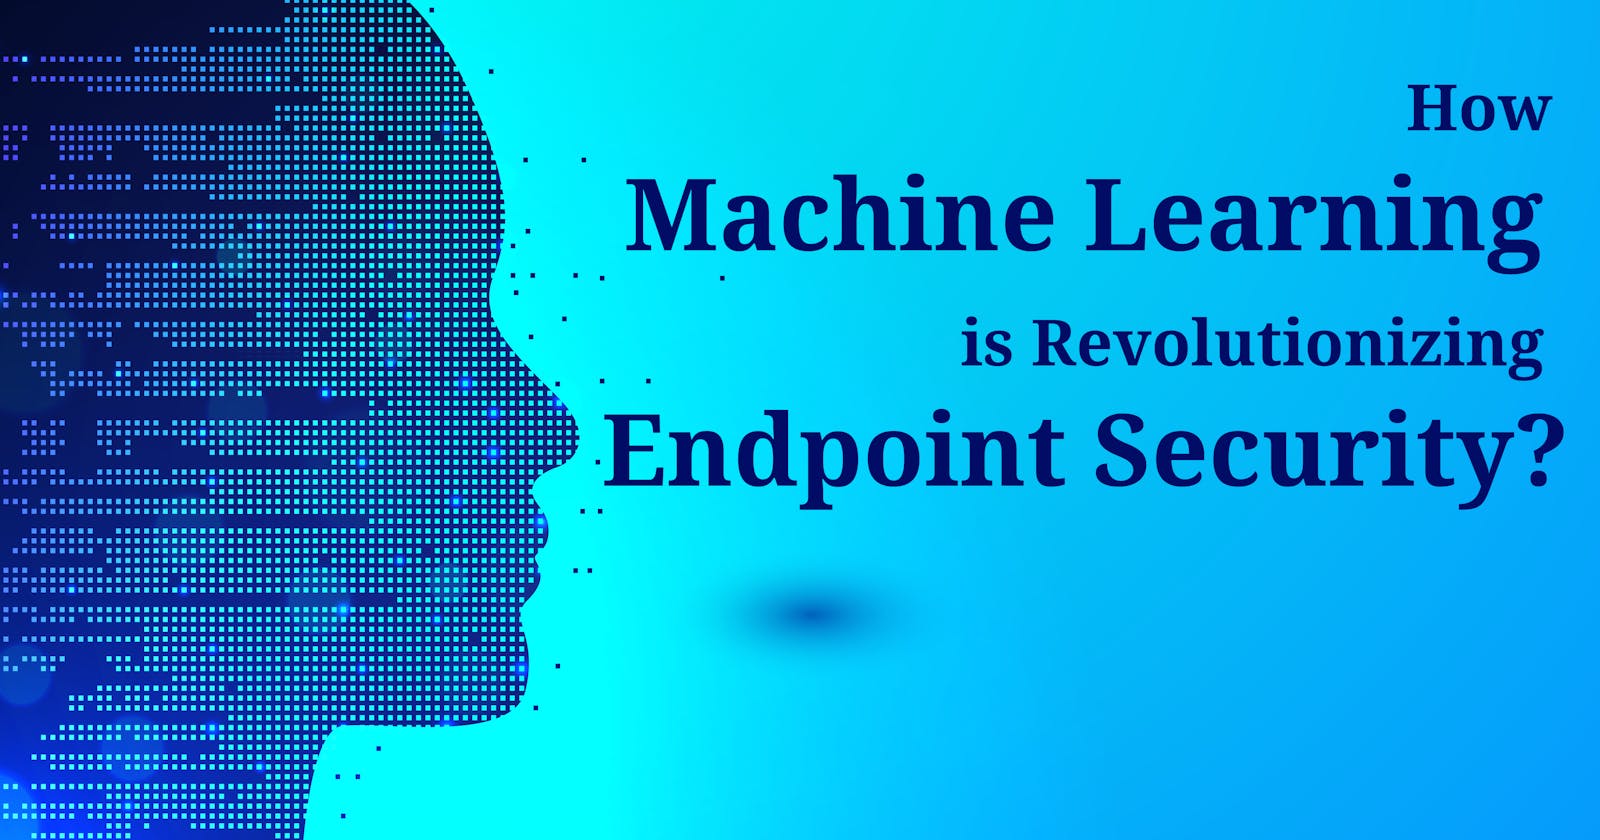 How Machine Learning is Revolutionizing Endpoint Security? | Cyberroot Risk Advisory